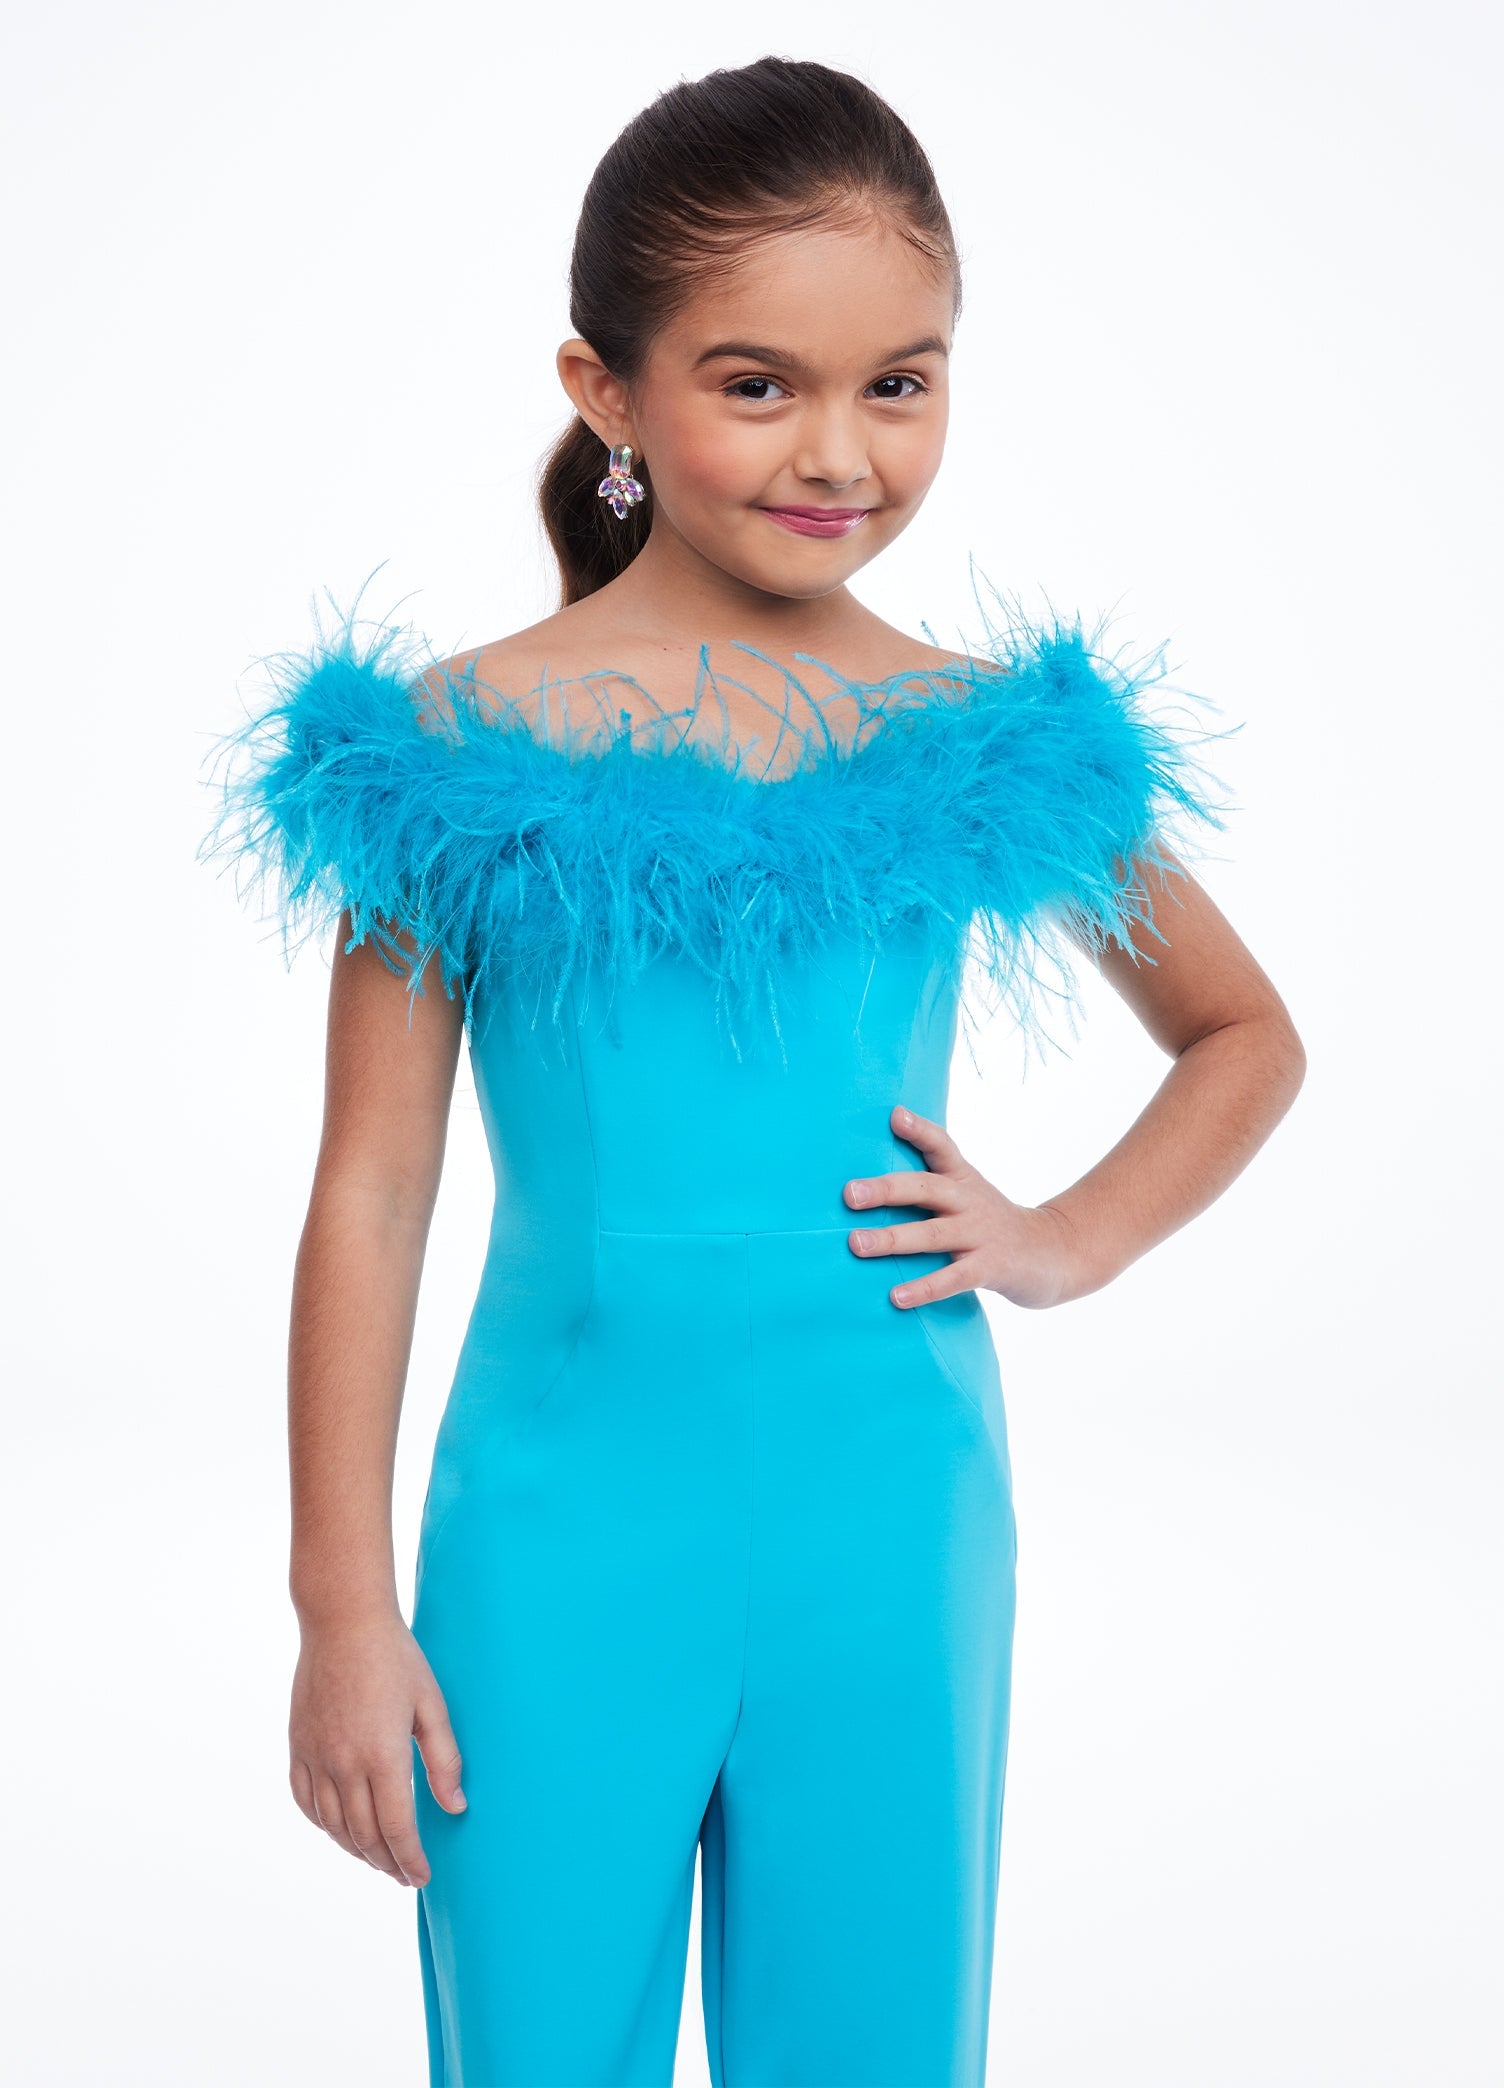 Ashley Lauren Kids 8114 Girls Scuba jumpsuit Pageant off the shoulder Feather Fun Fashion This sassy off the shoulder scuba jumpsuit features feather details on the neckline giving way to flared leg pants. Off Shoulder Feather Details Available Sizes: 2-16 Available Colors: Turquoise, Hot Pink